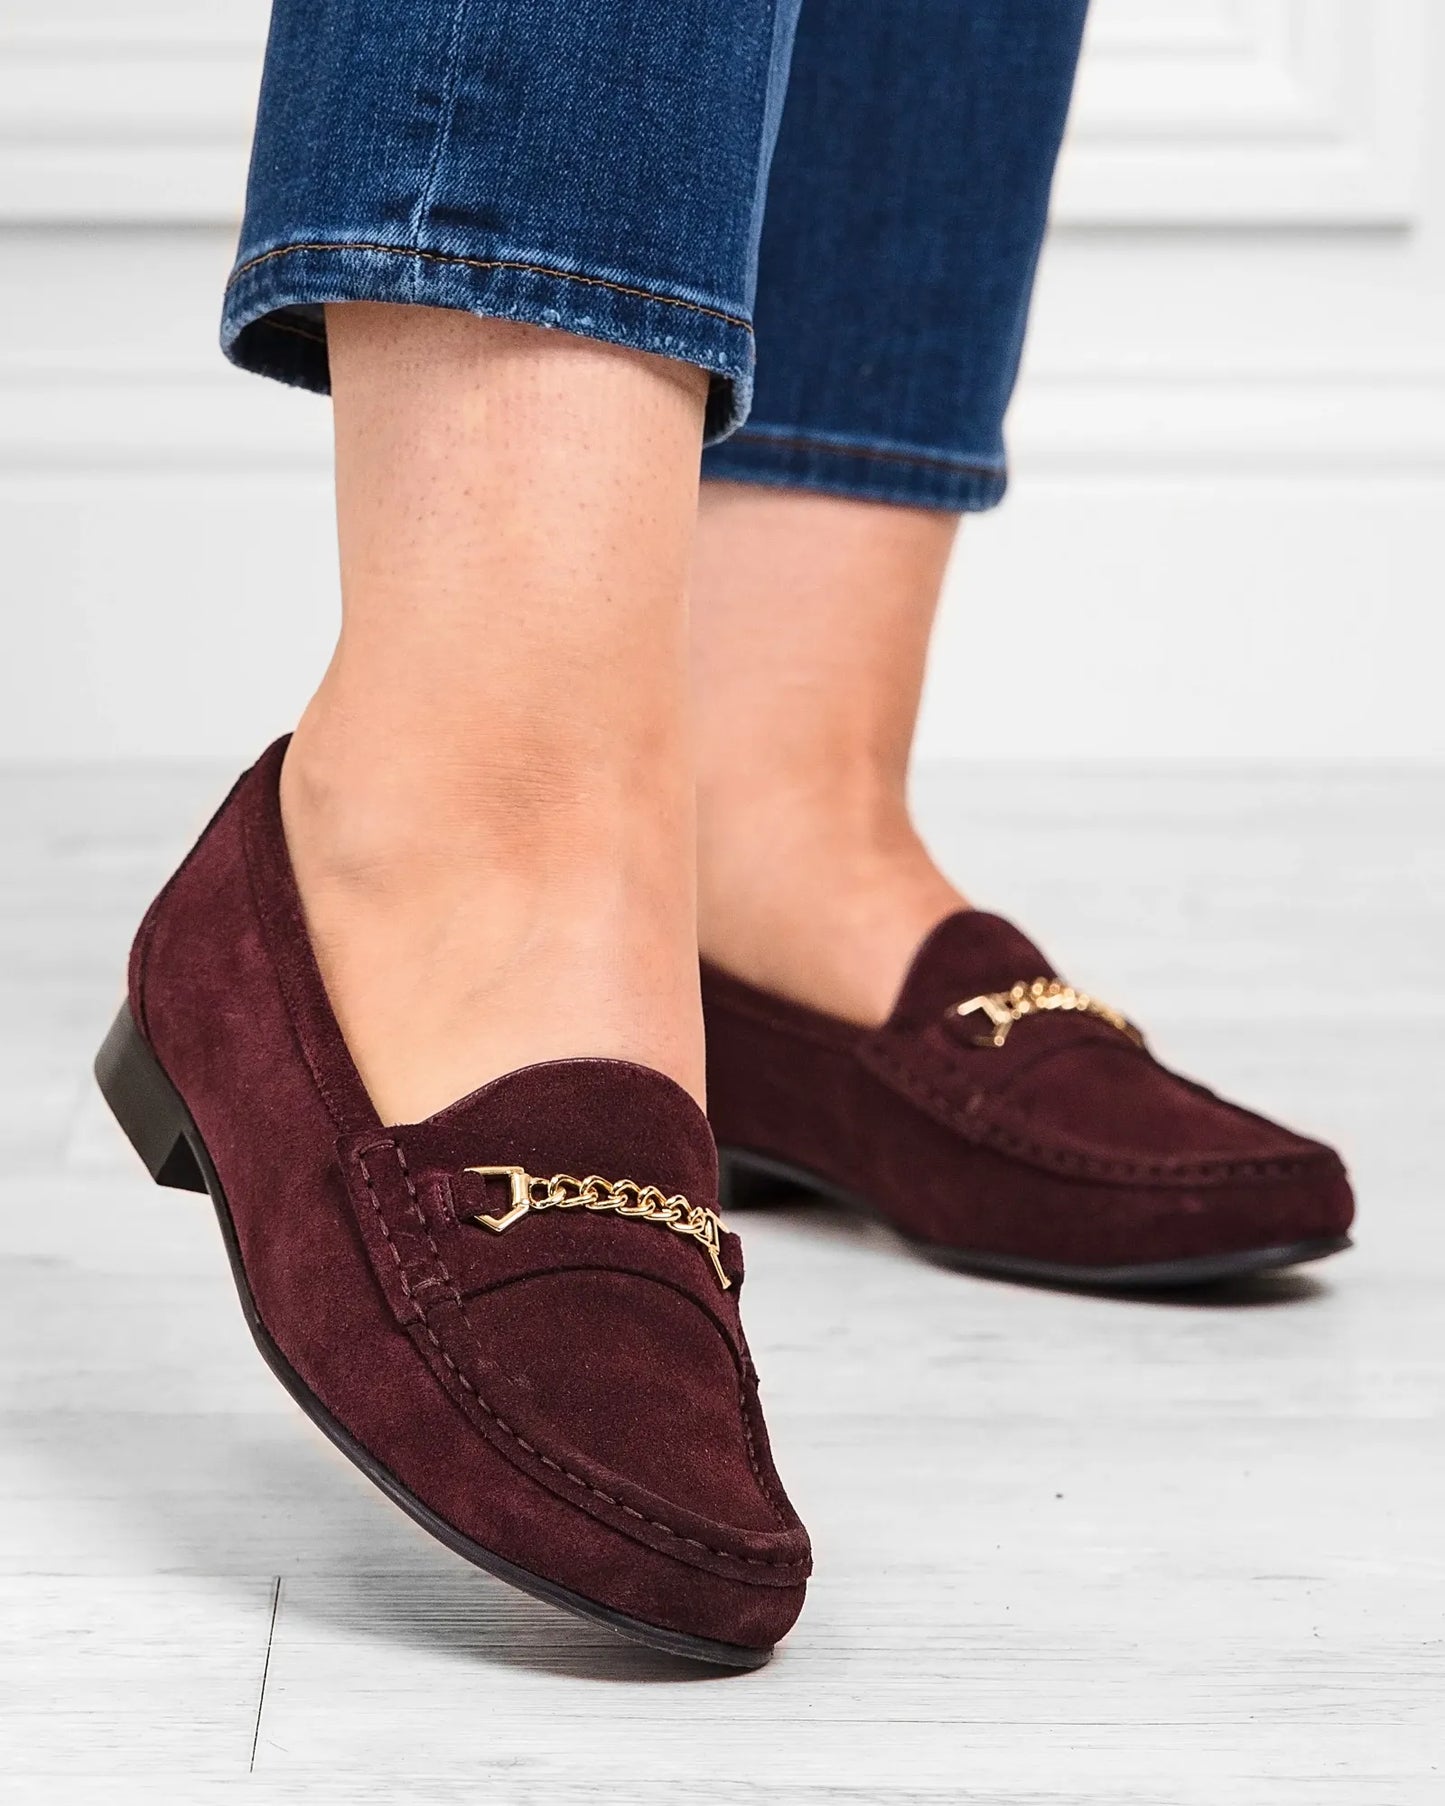 The Apsley Loafer in Plum Suede